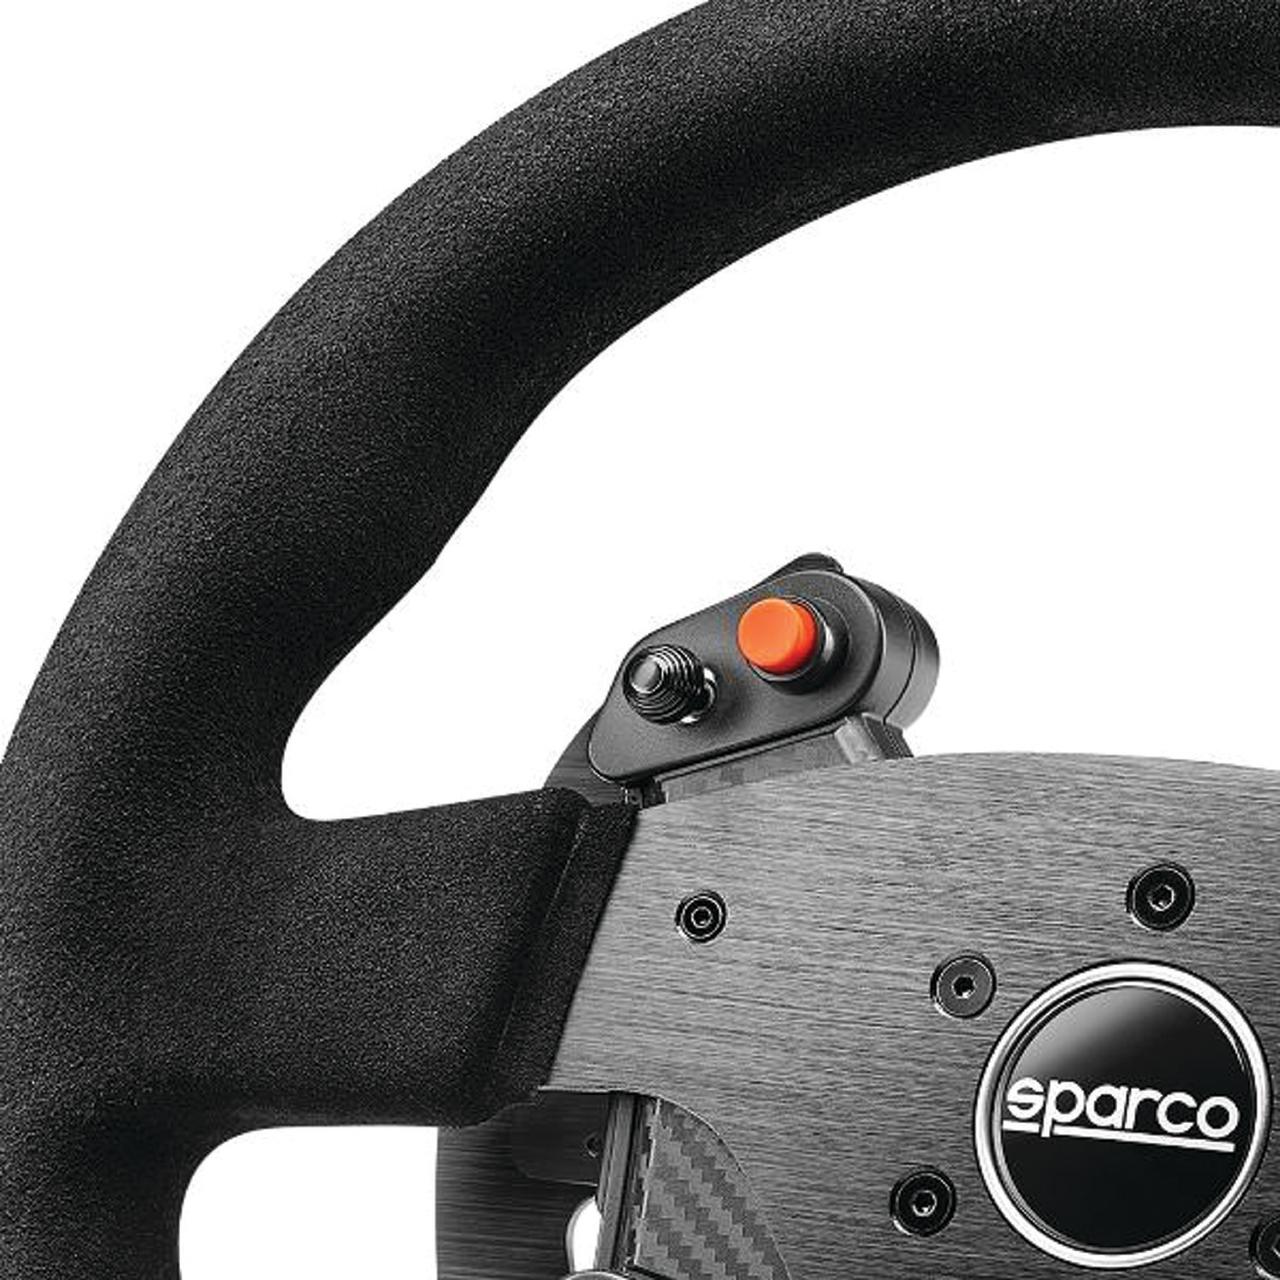 Thrustmaster R 383 Sparco Wheel for PS4, PS5, Xbox One, Series X/S, and PC - image 3 of 5